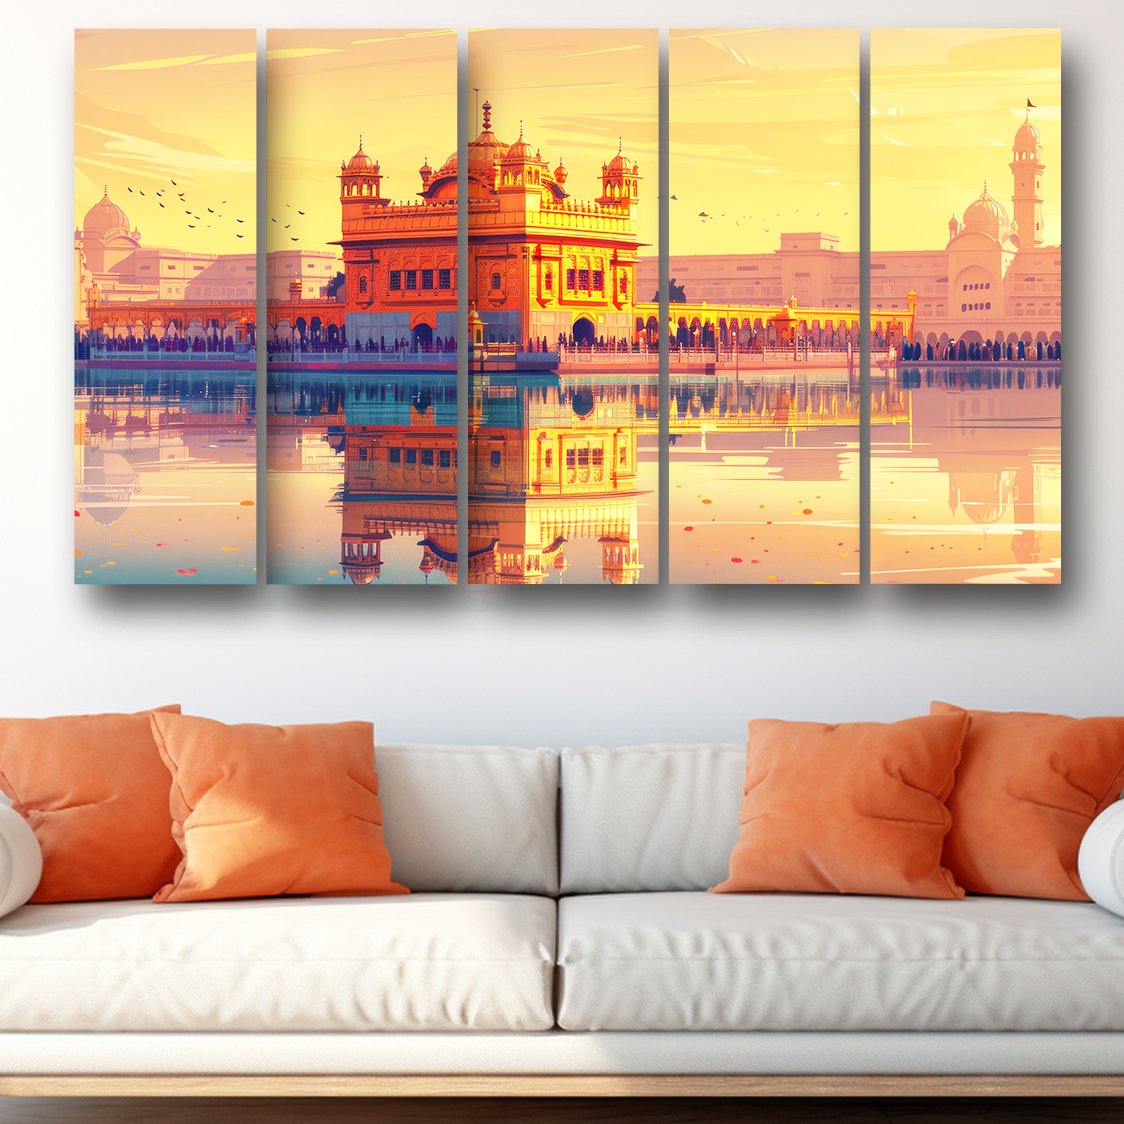 Casperme Golden Tample Wall Painting For Living Room for Bedroom, Hotels & Office Decoration (48×30 inhes)